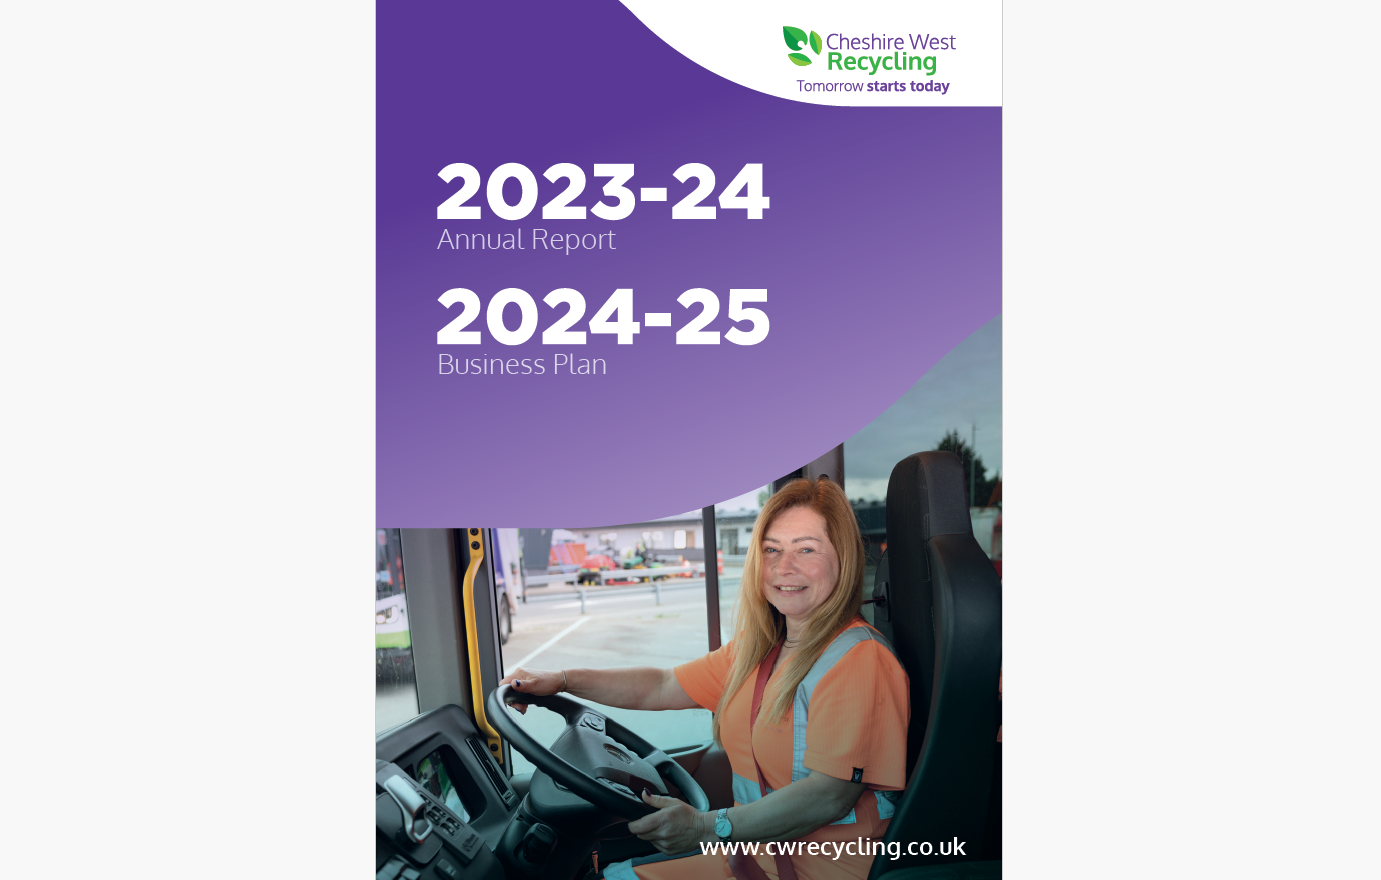 Our 2023/24 Annual Report and  2024/25 Business Plan front cover